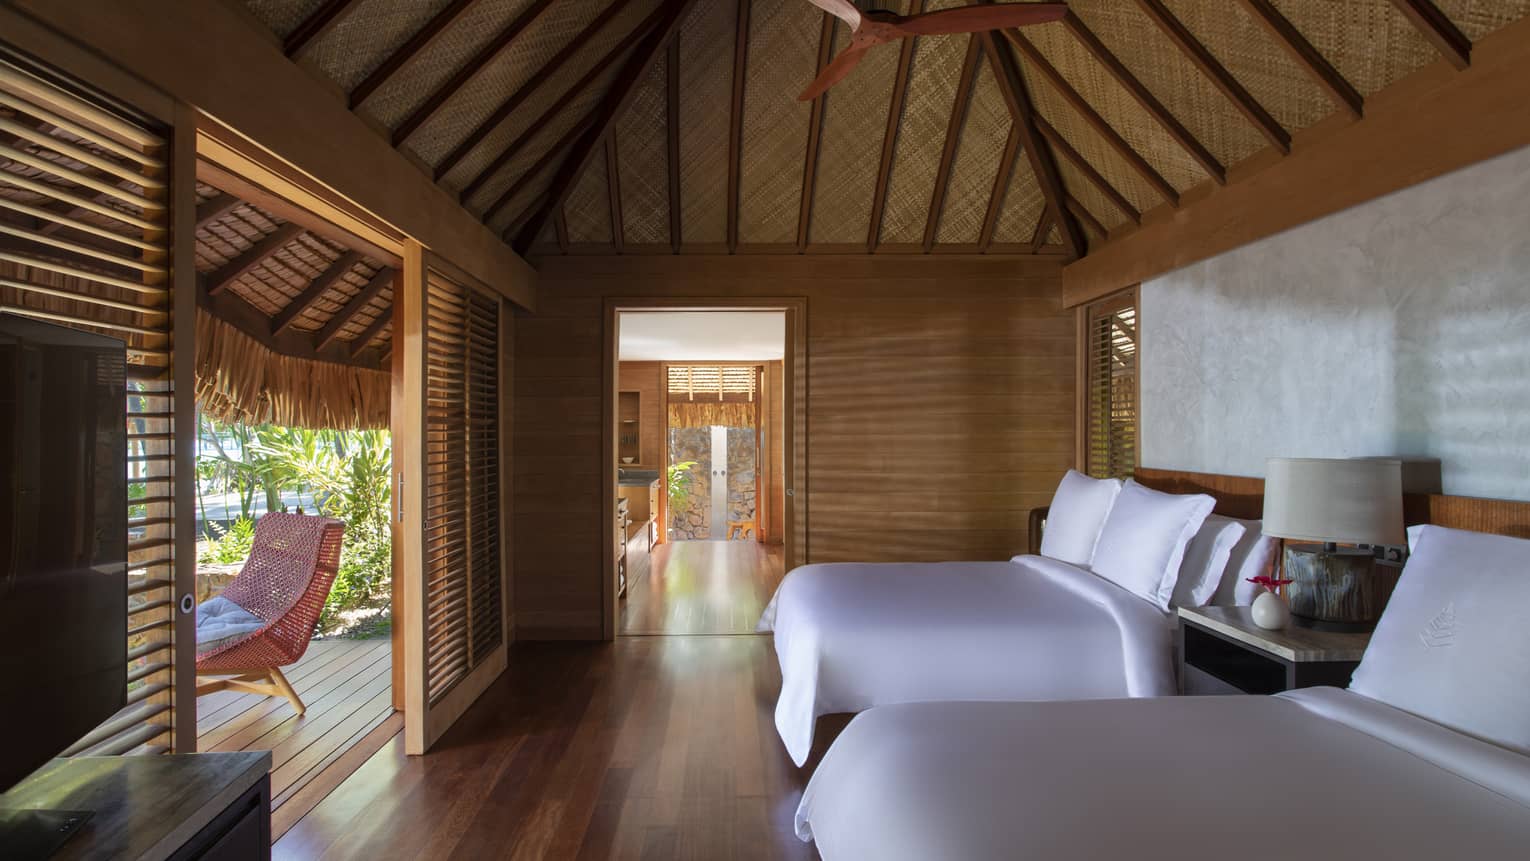 Two queen beds in a villa, with teak floors, a thatched roof and a walk-out patio